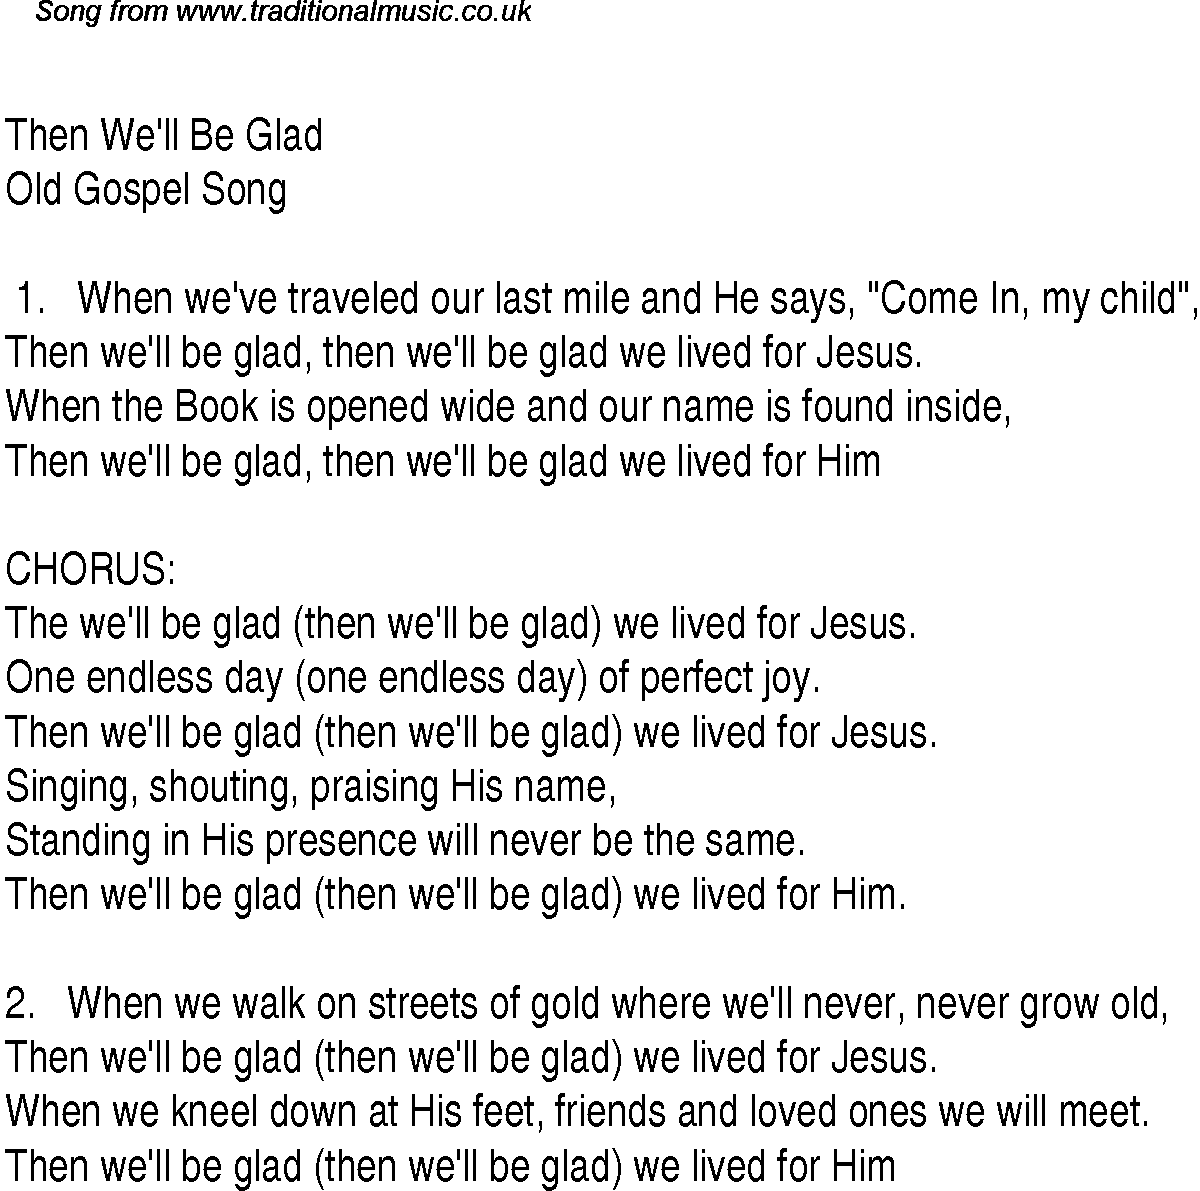 Gospel Song: then-we'll-be-glad, lyrics and chords.